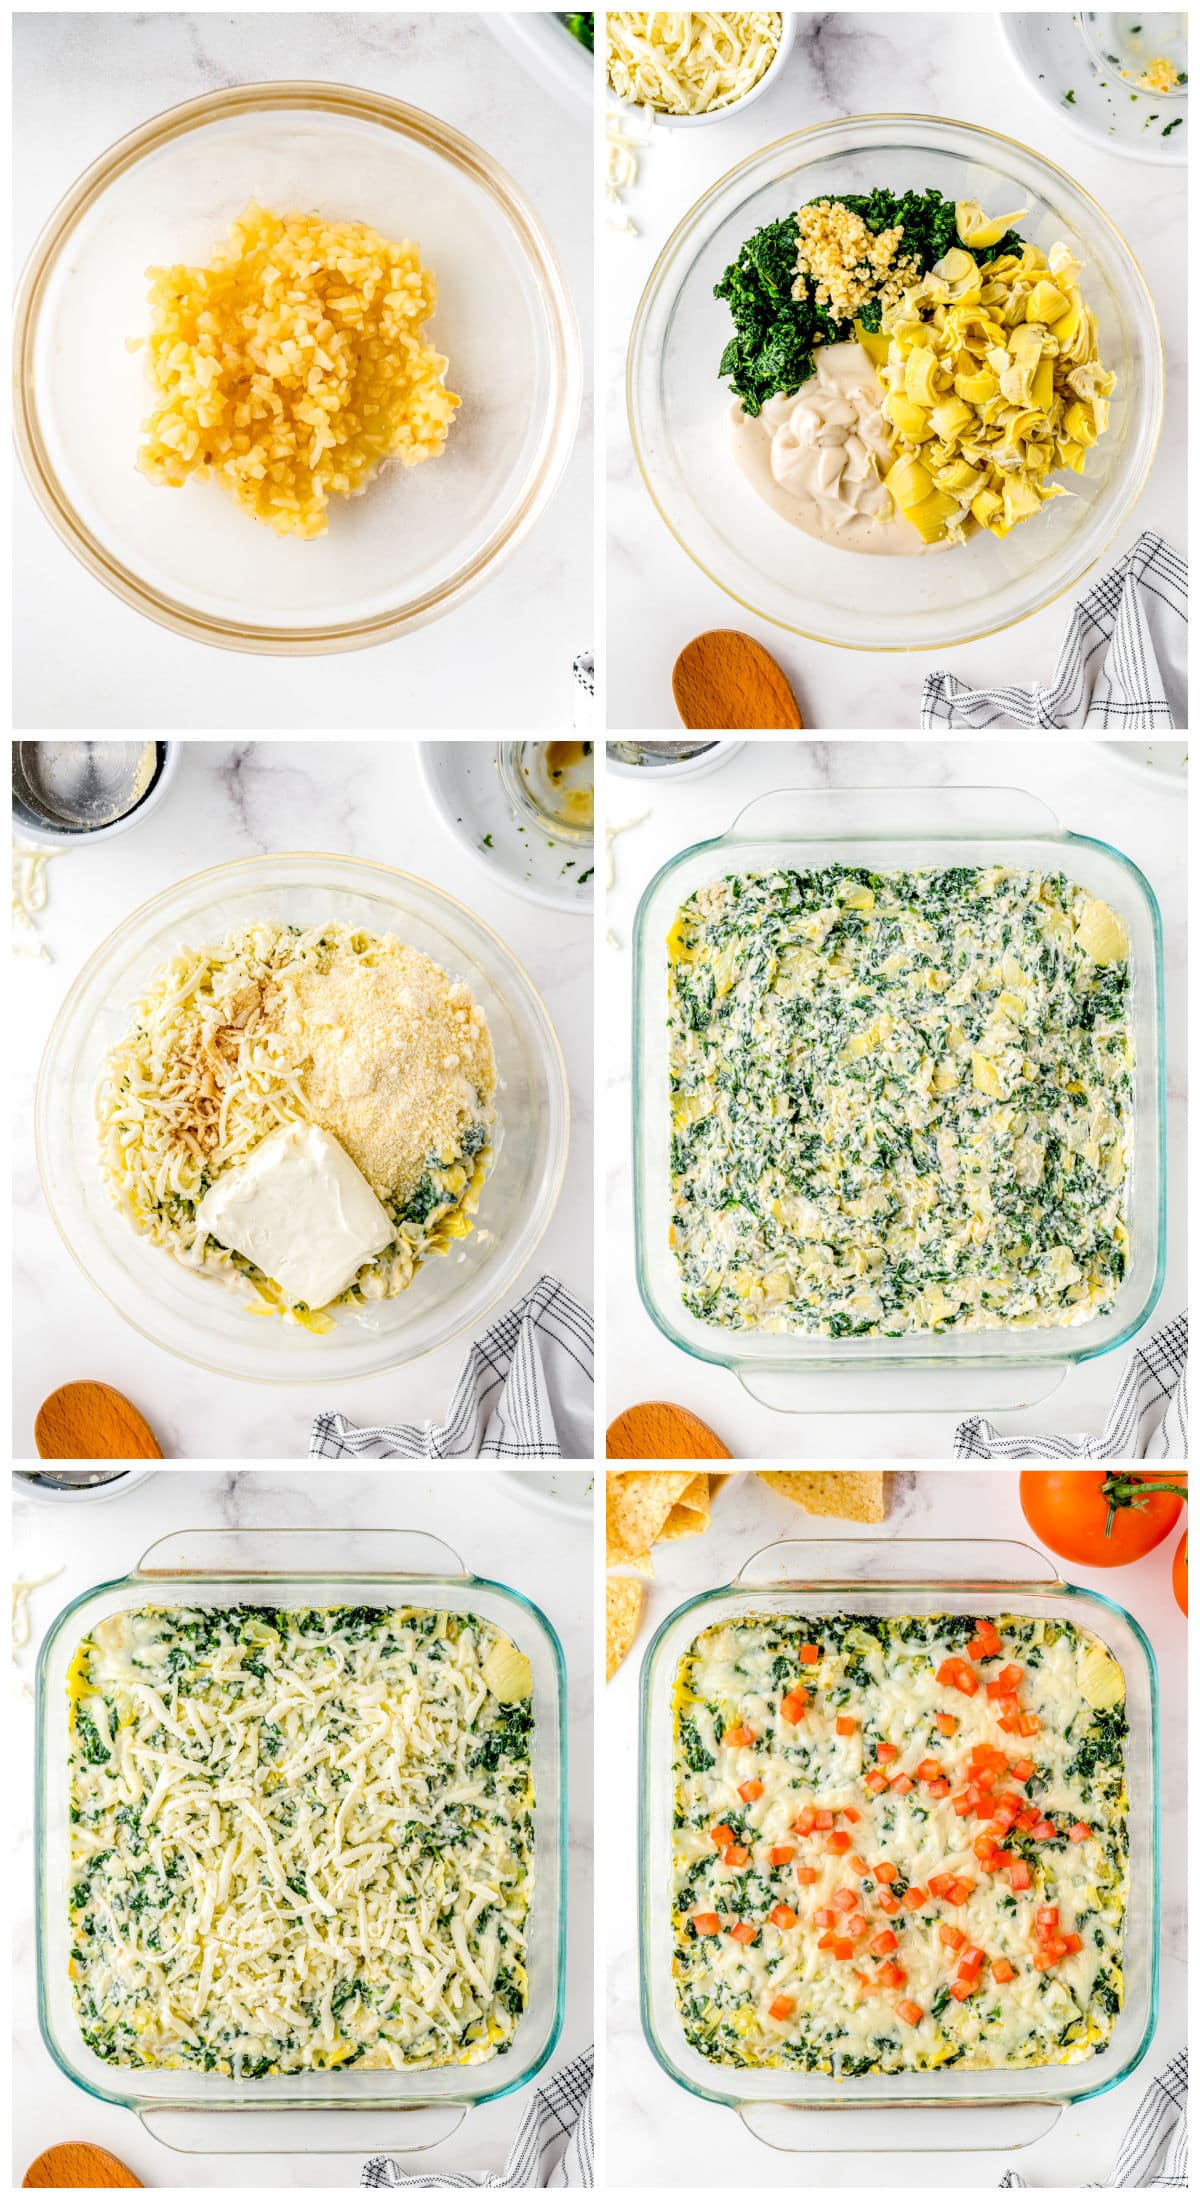 A picture collage showing how to make this dip.